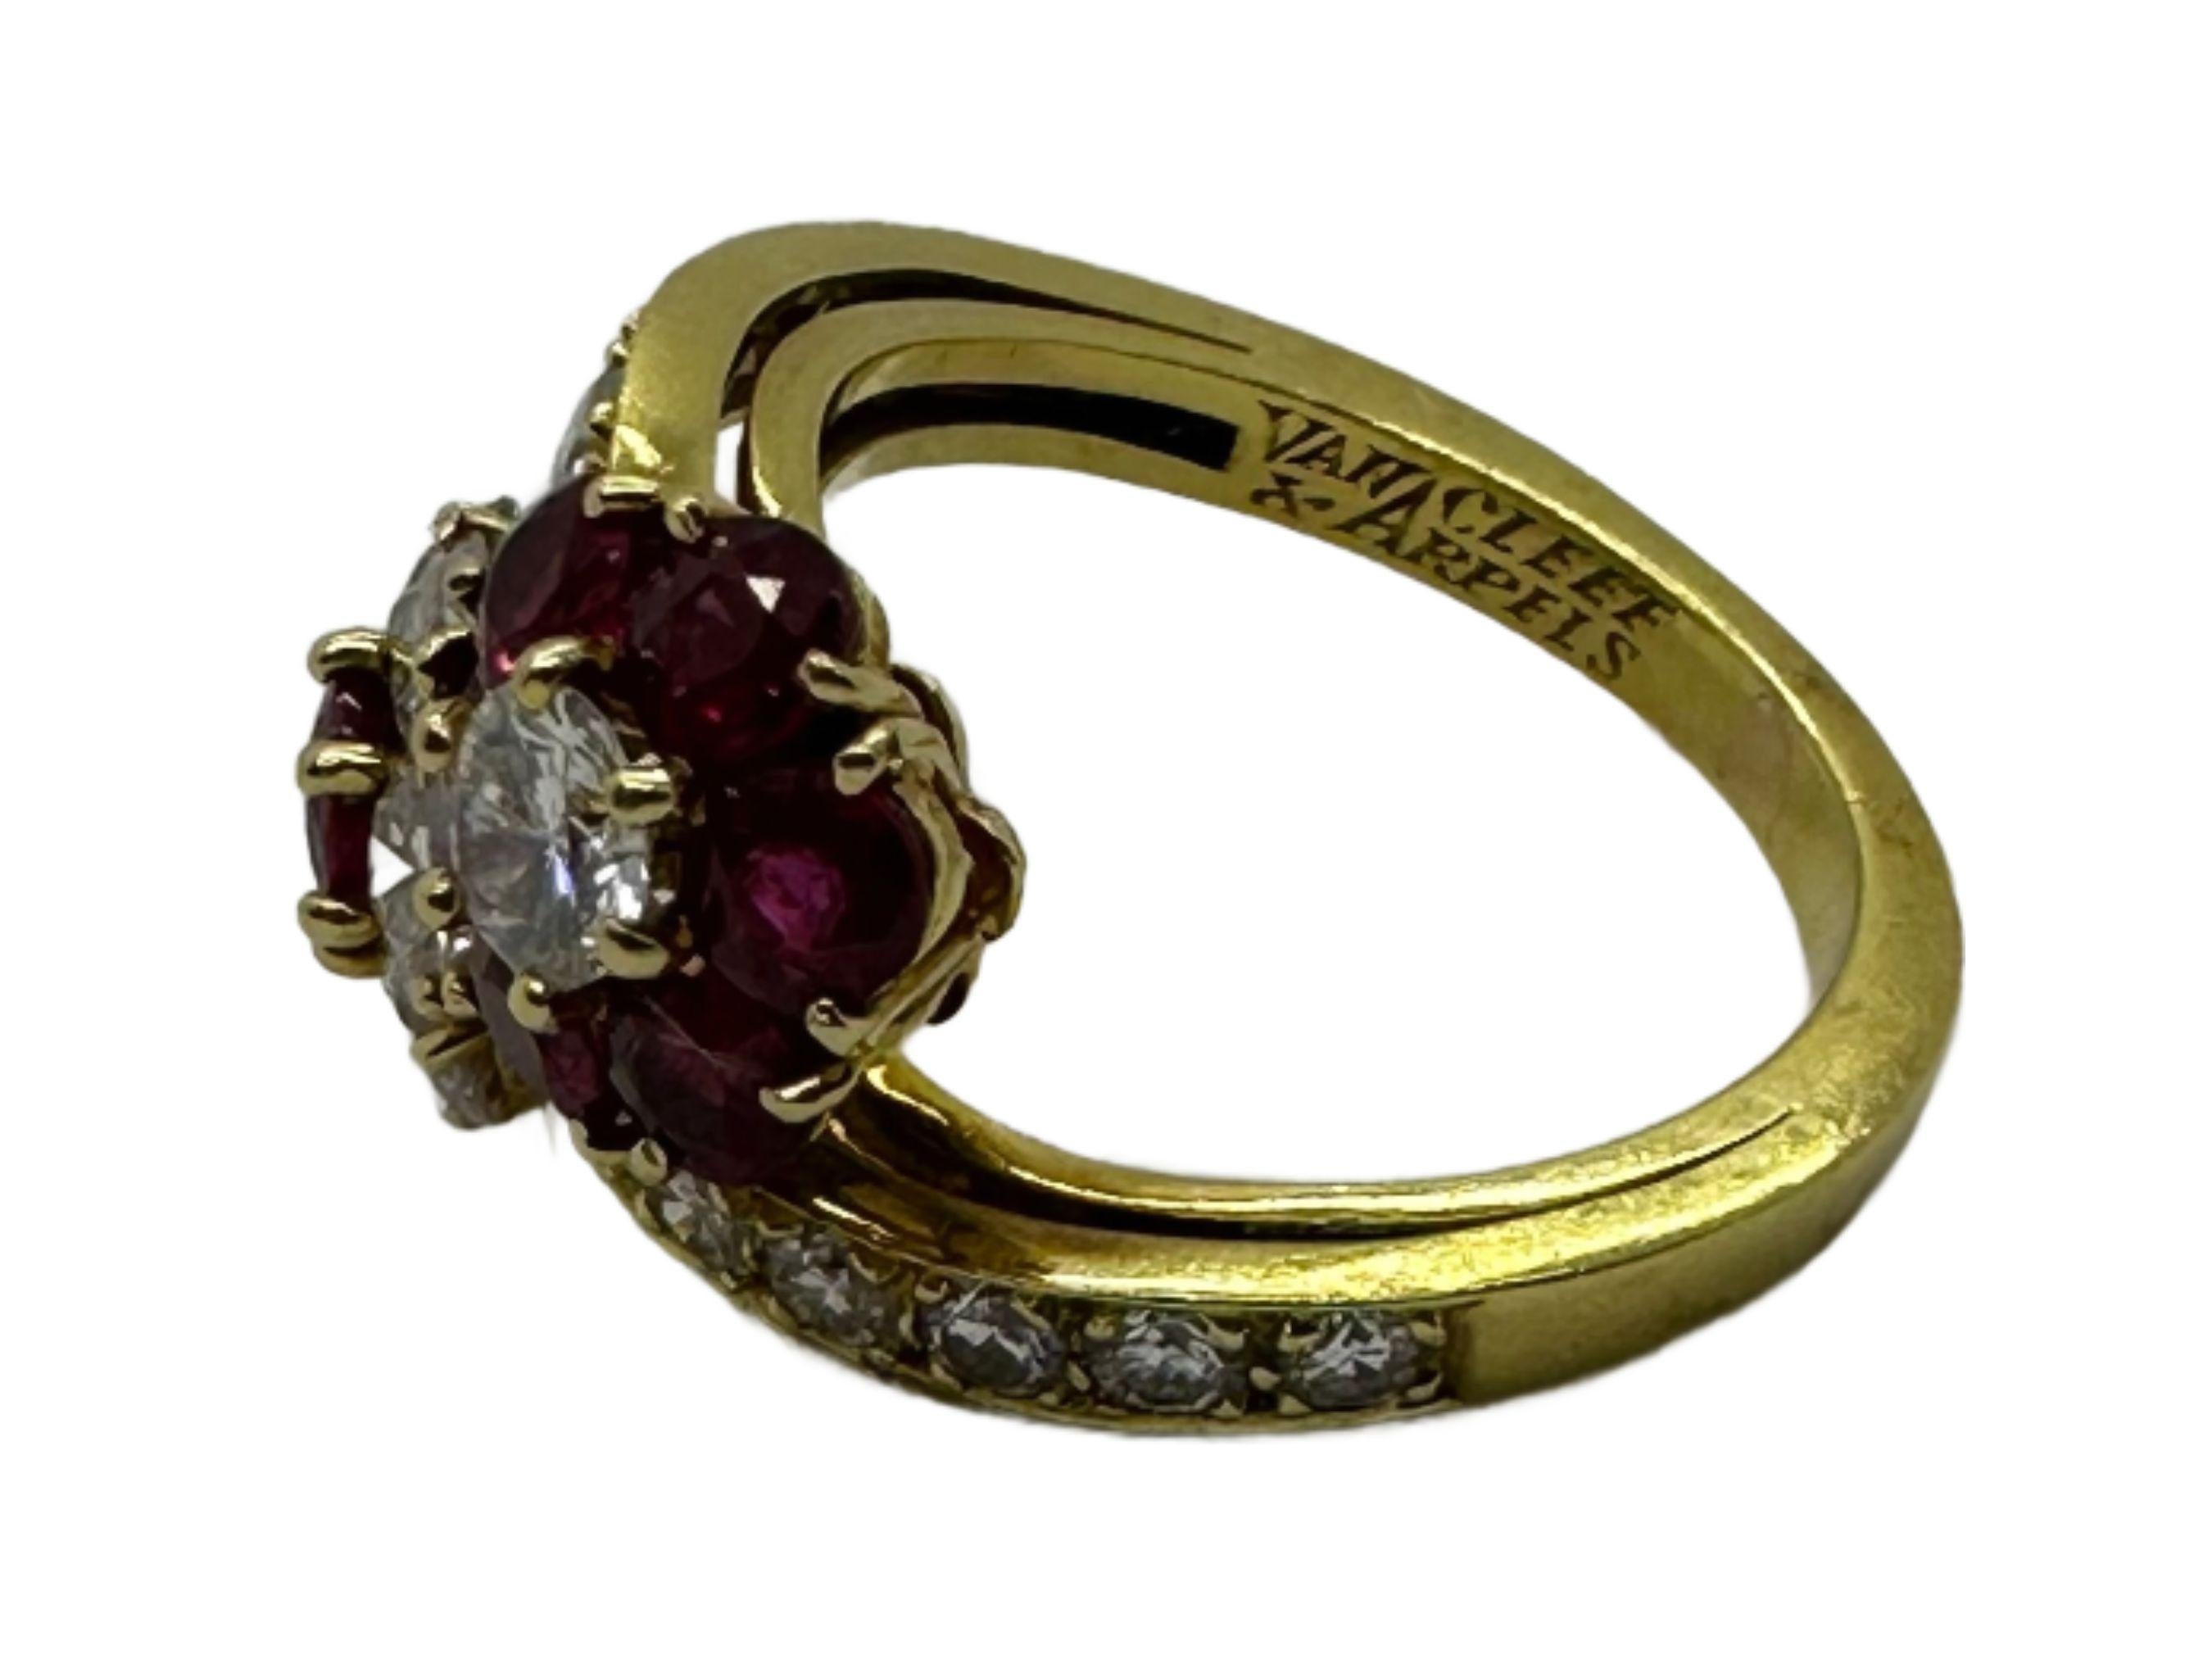 18k Estate Van Cleef & Arpels Diamond and Ruby Bypass Ring In Good Condition For Sale In New York, NY